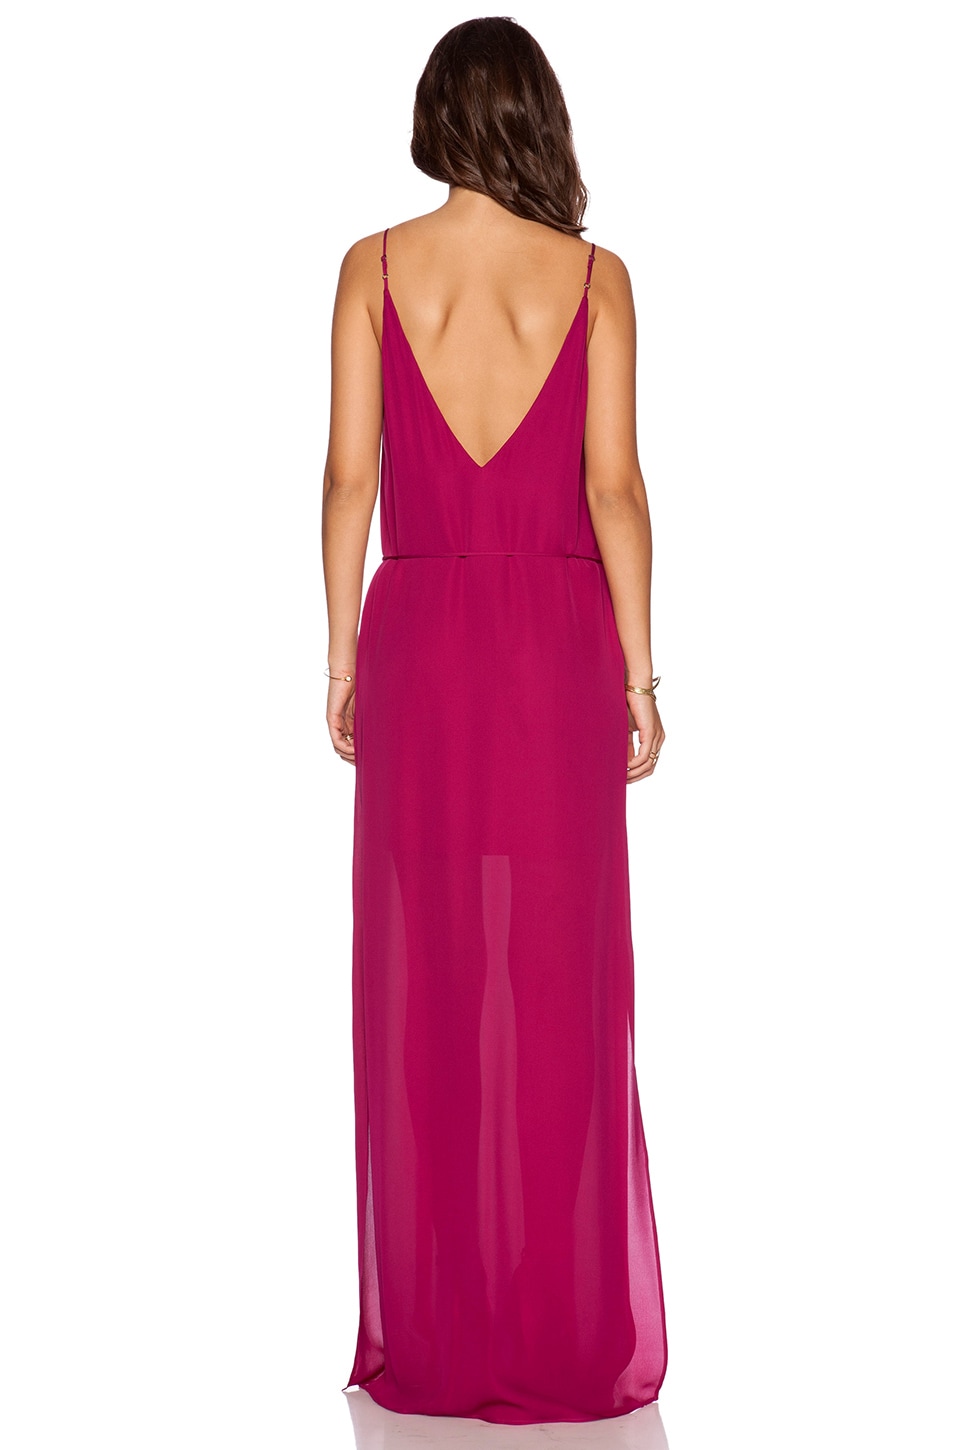 Rory Beca MAID by Yifat Oren Harlow Gown in Magenta | REVOLVE